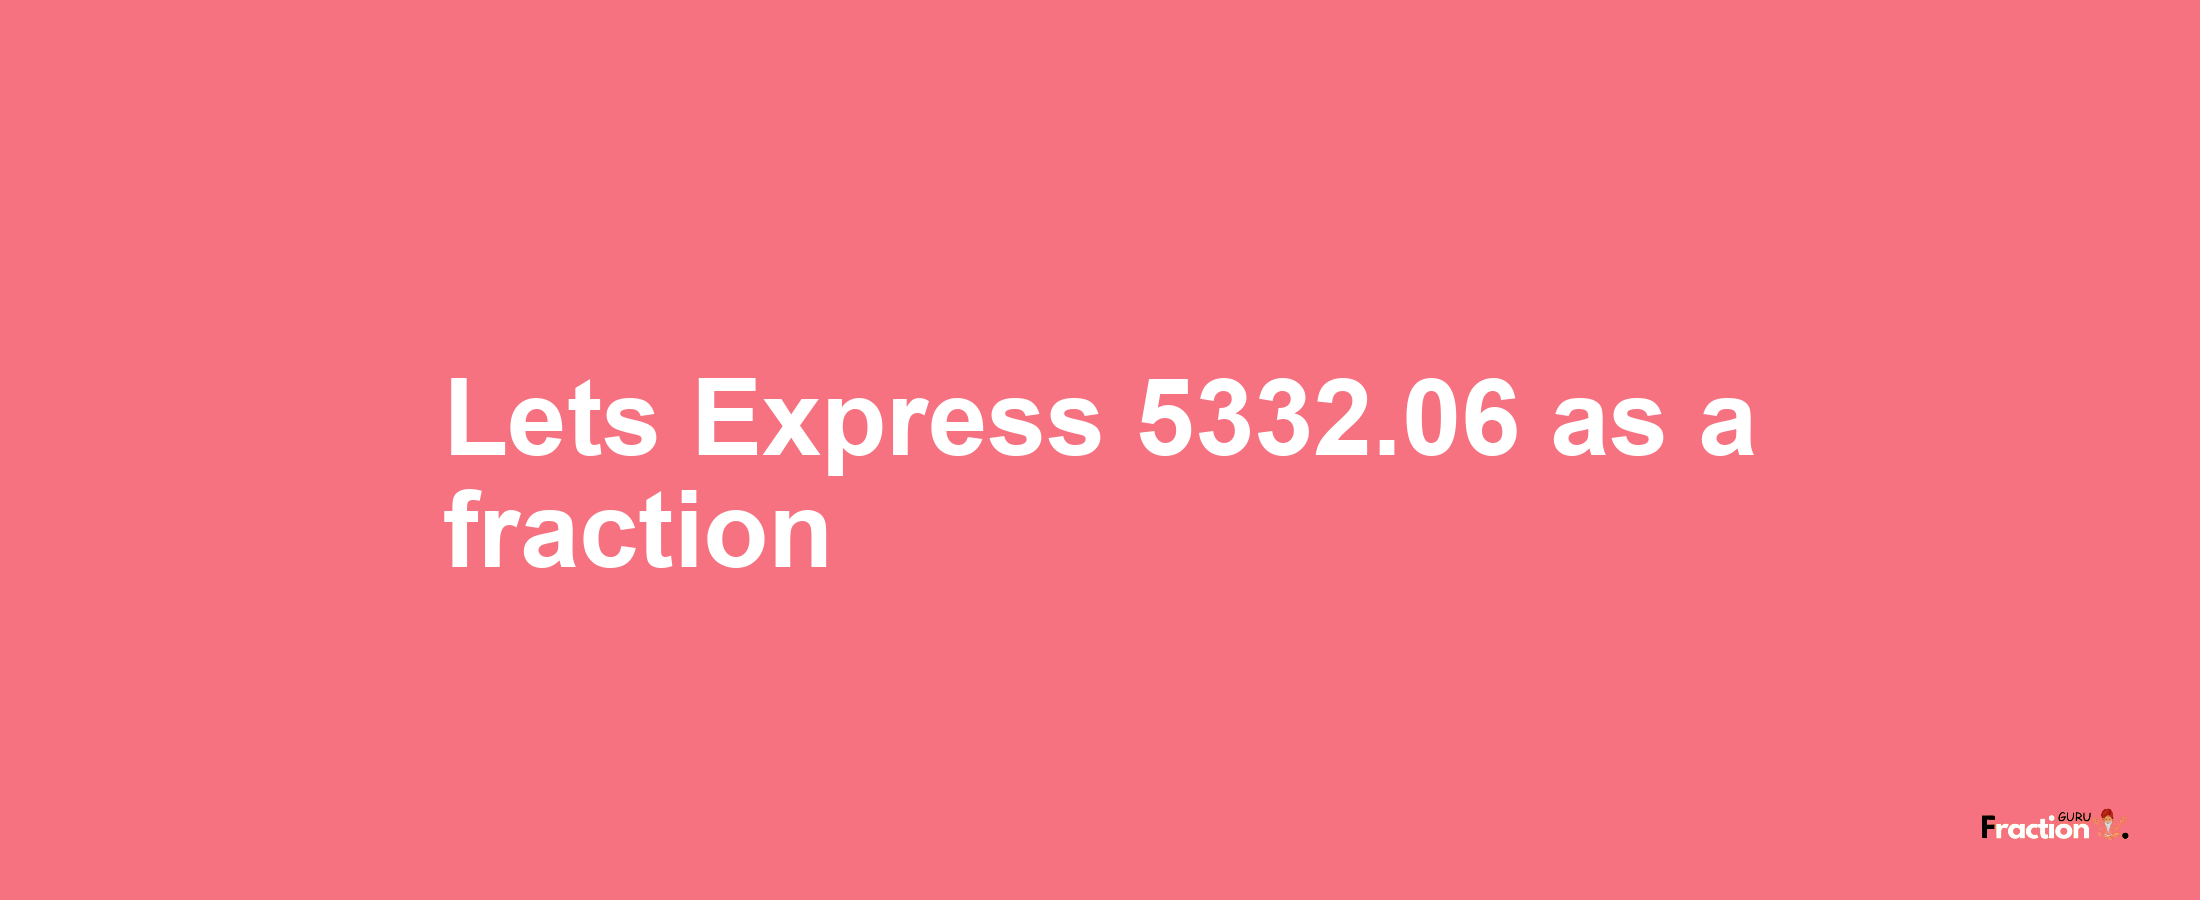 Lets Express 5332.06 as afraction